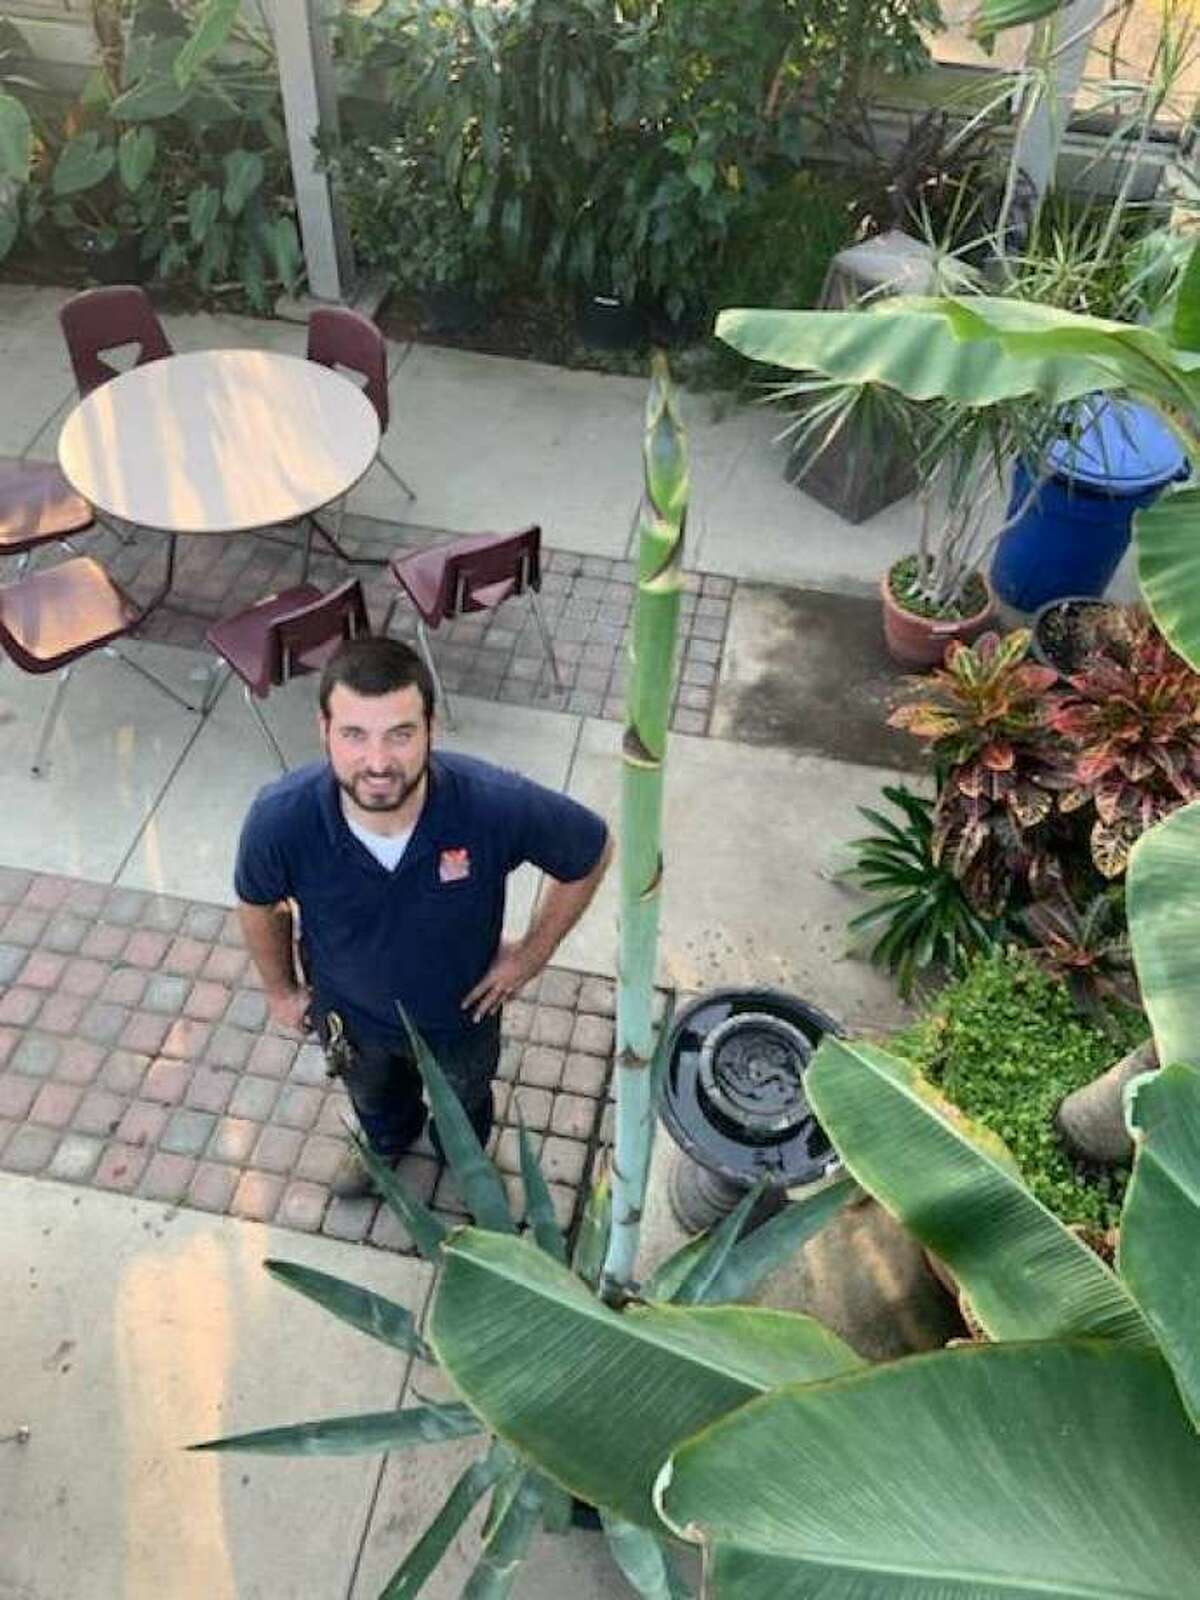 Connecticut's Beardsley Zoo horticulture manager Jonathan Dancho poses with an Agave plant, also known as a century plant.